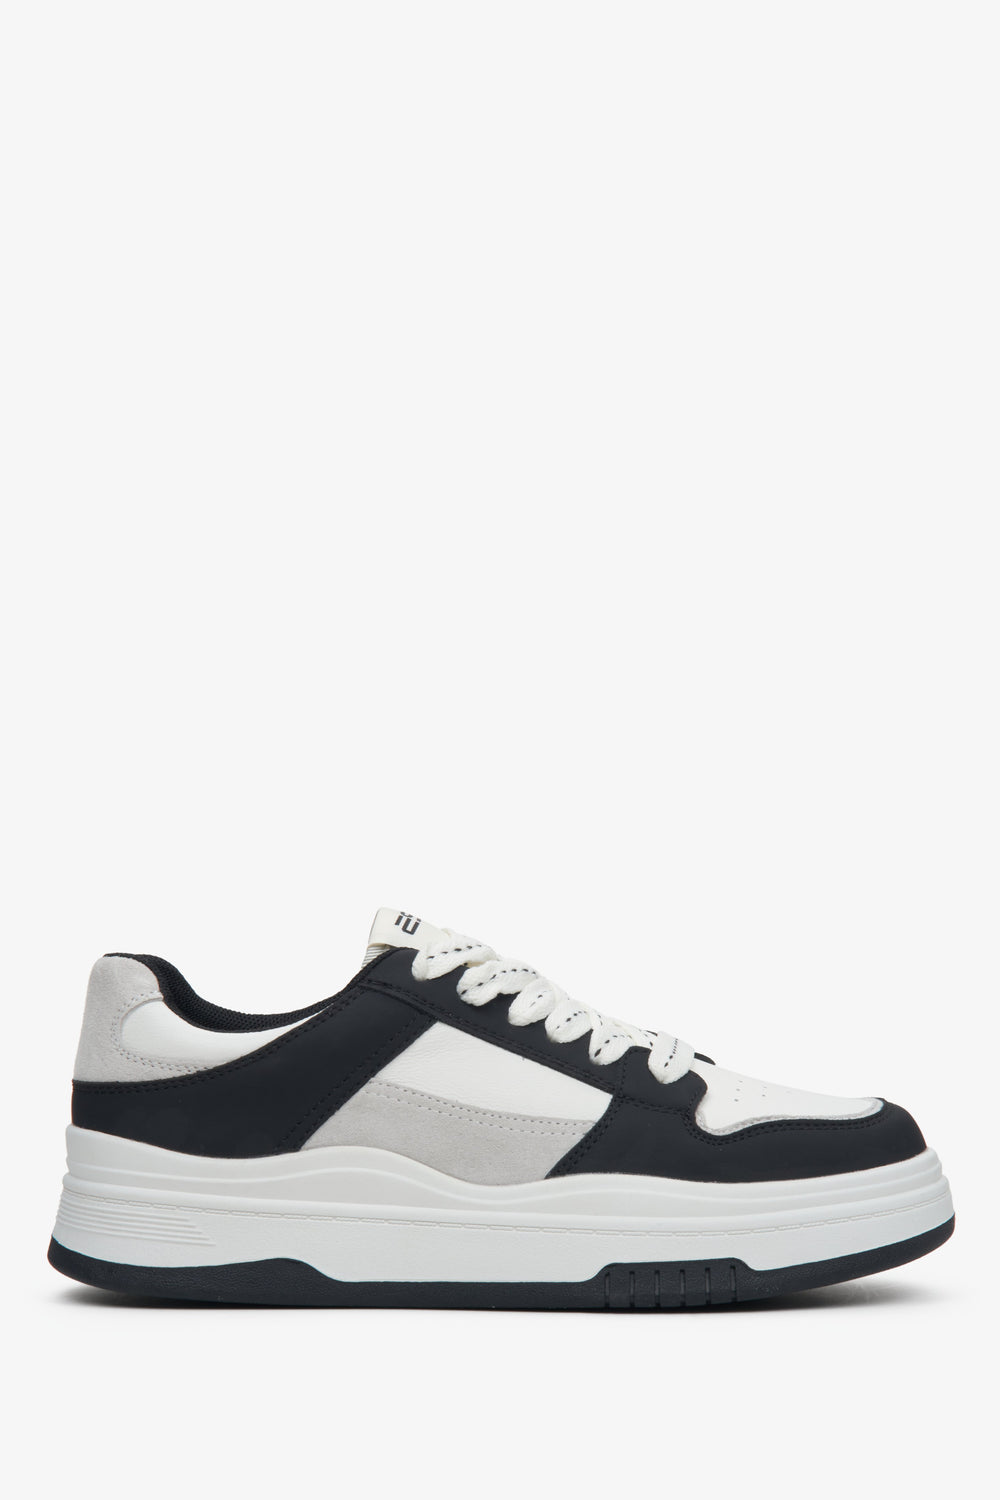 Women's White and Black Leather Sneakers ES 8 ER00113317.